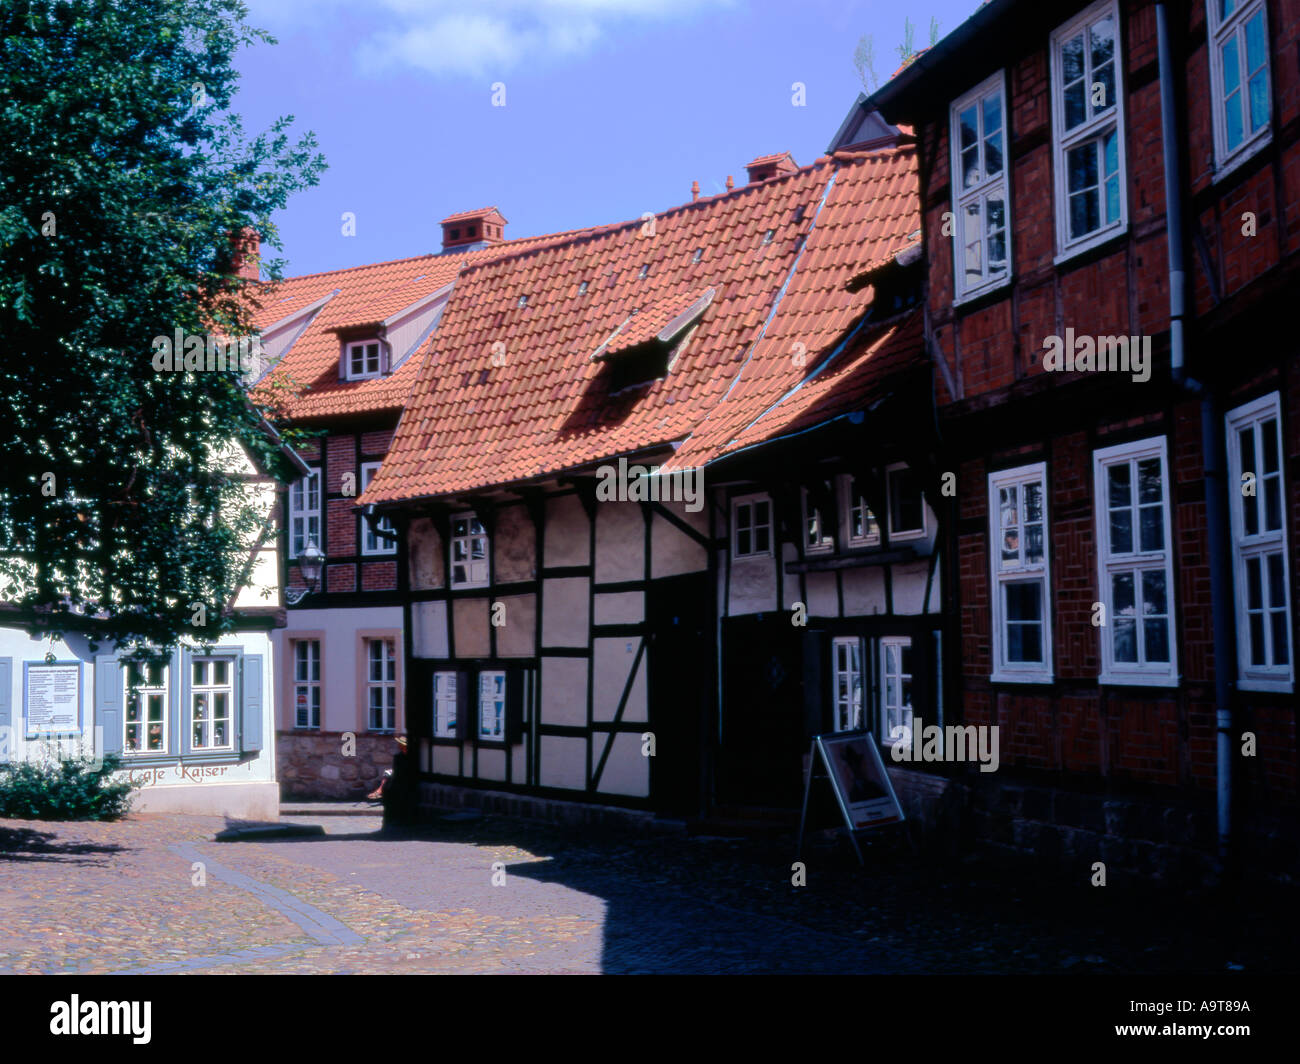 Medieval square with decorated half timberd houses in Quedlinburg Sachsen Anhalt Germany Stock Photo